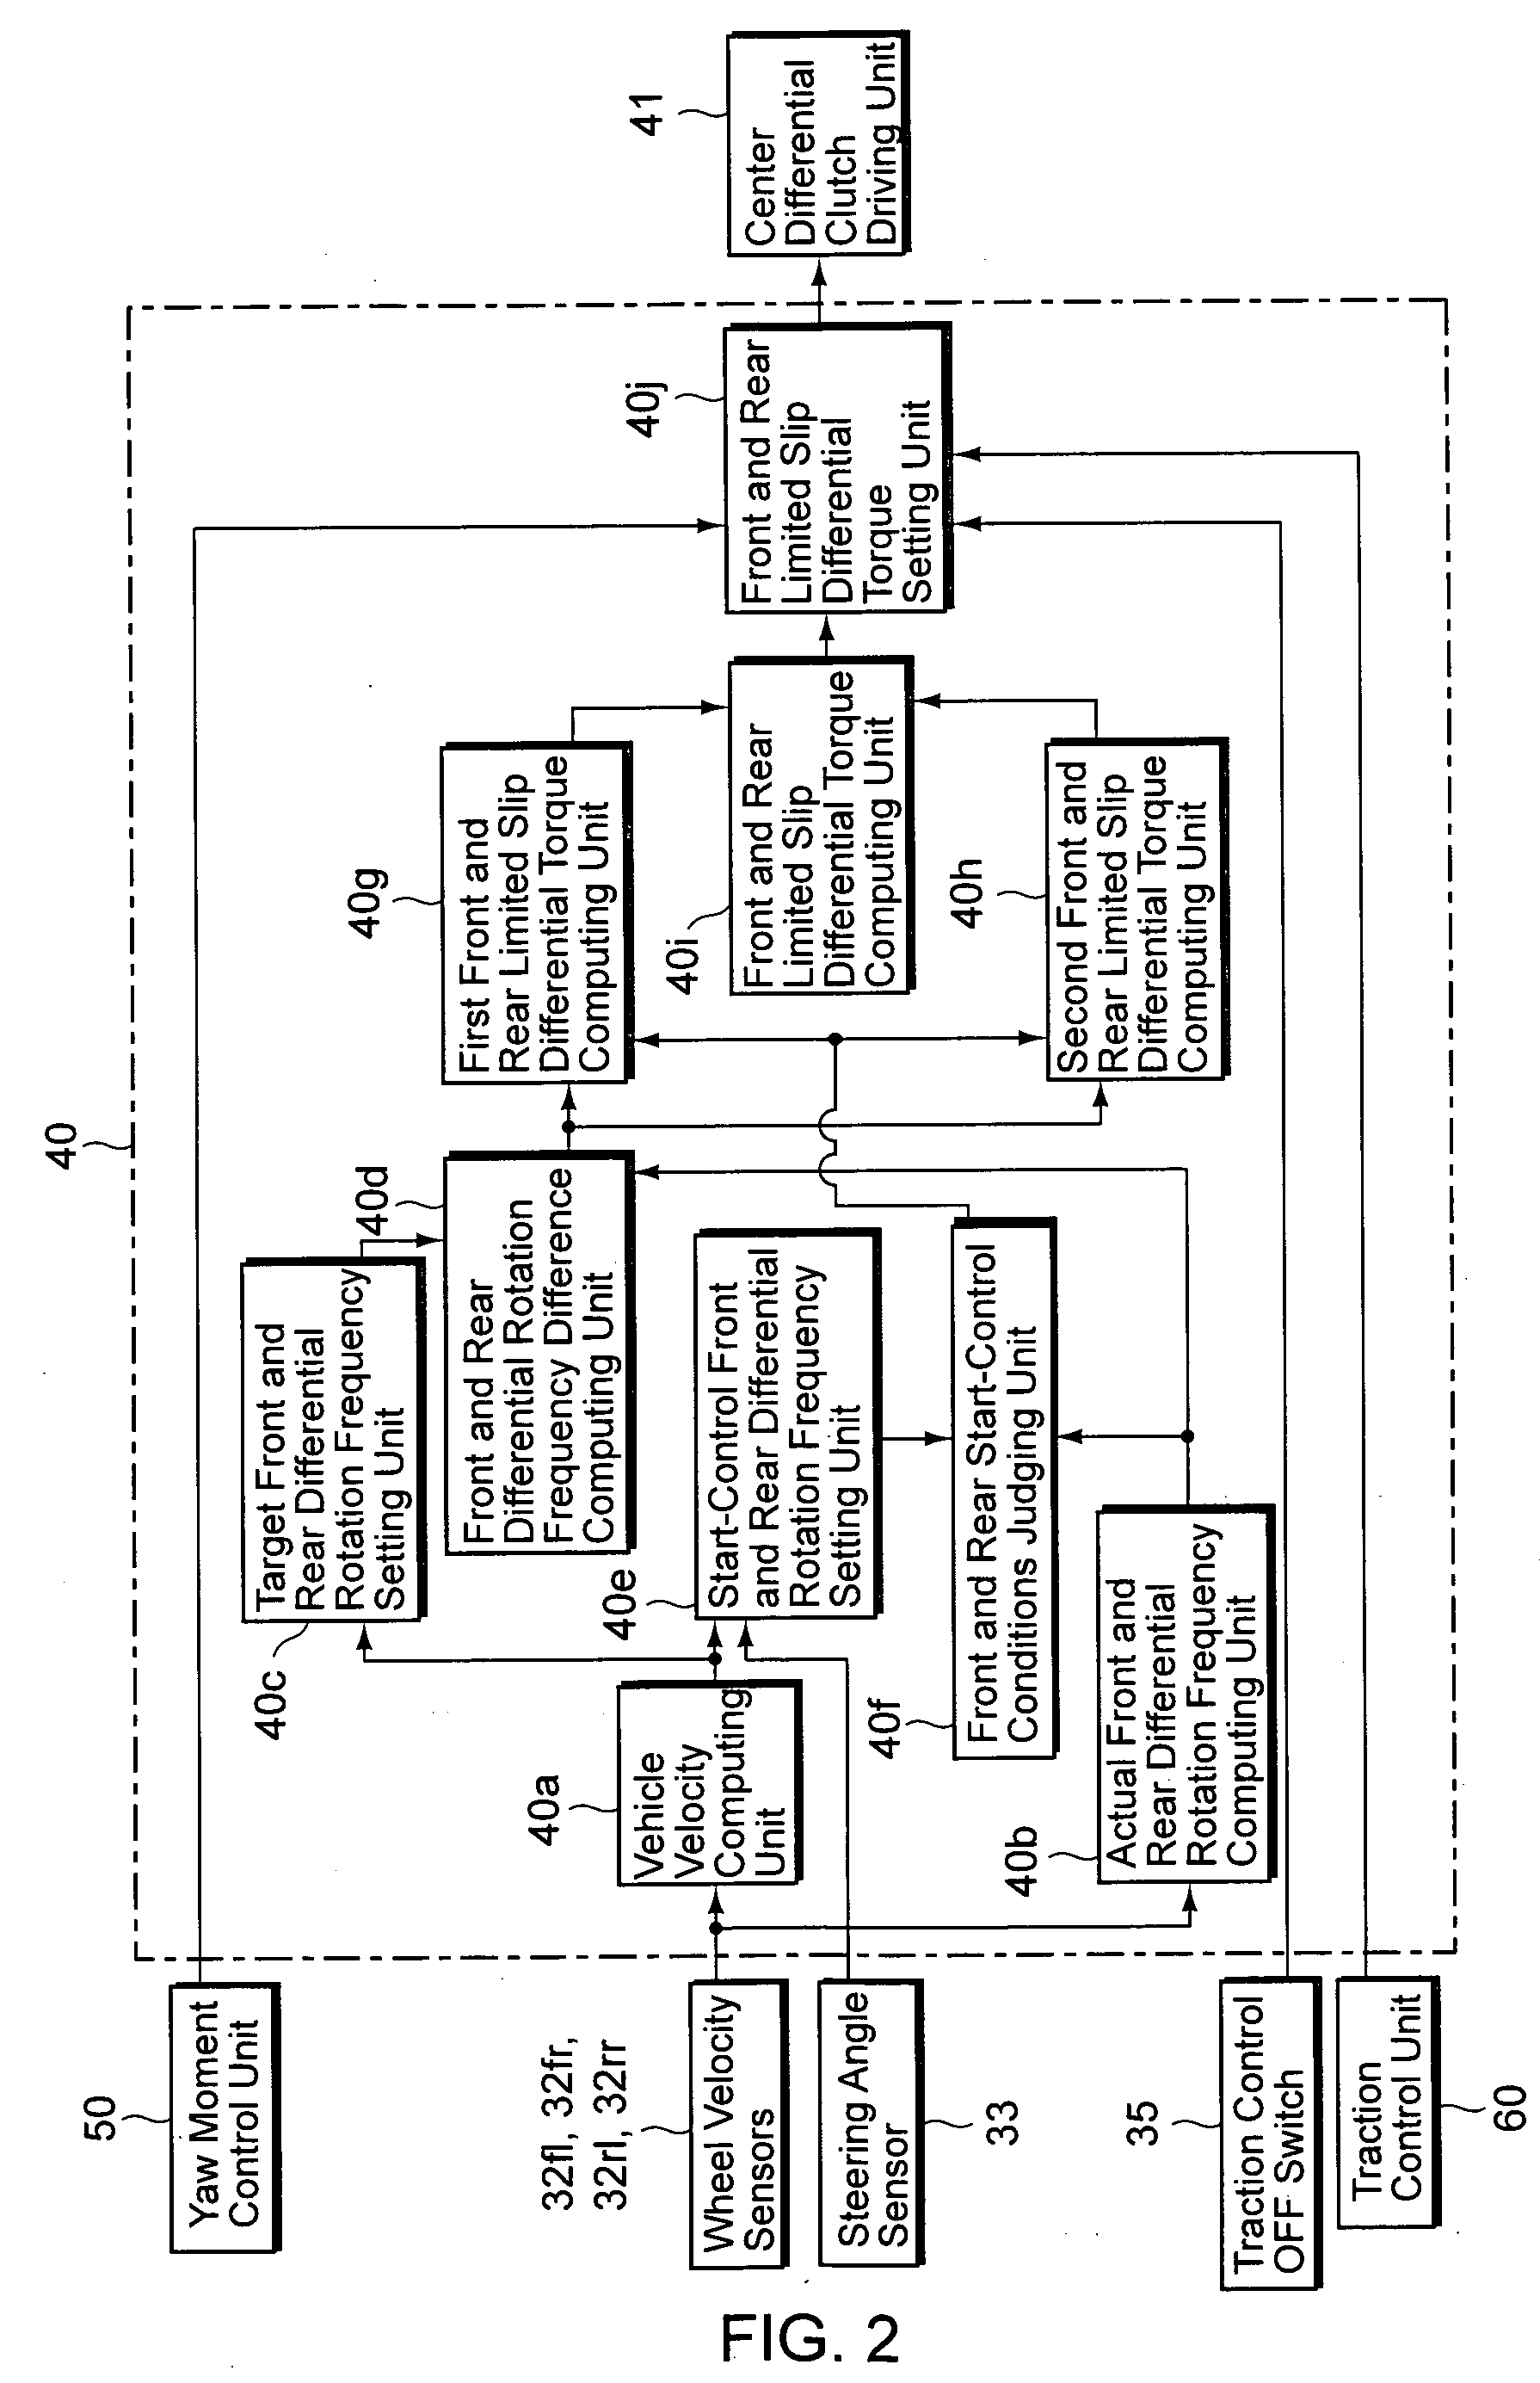 Control device for a four-wheel drive vehicle